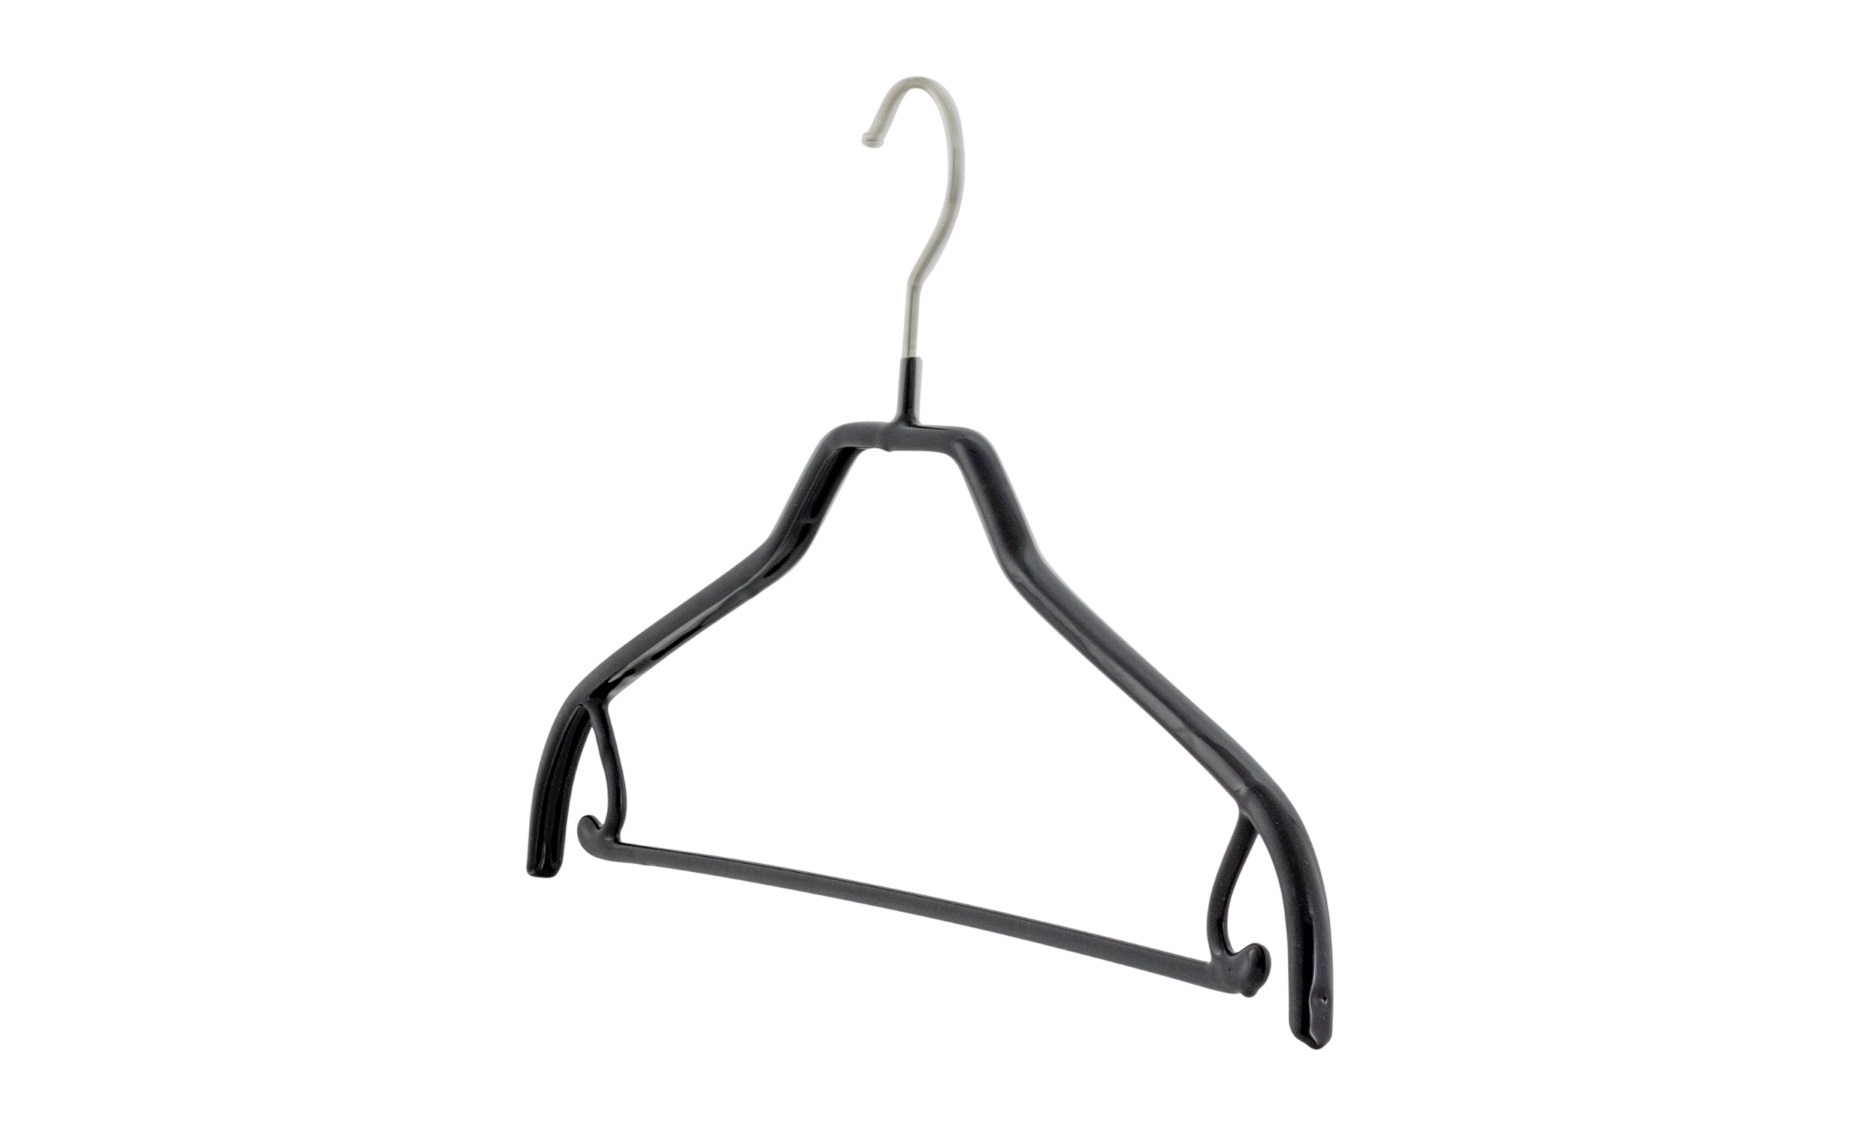 MAWA CLOTHES HANGER SILHOUETTE WITH BAR BLACK 2PCS